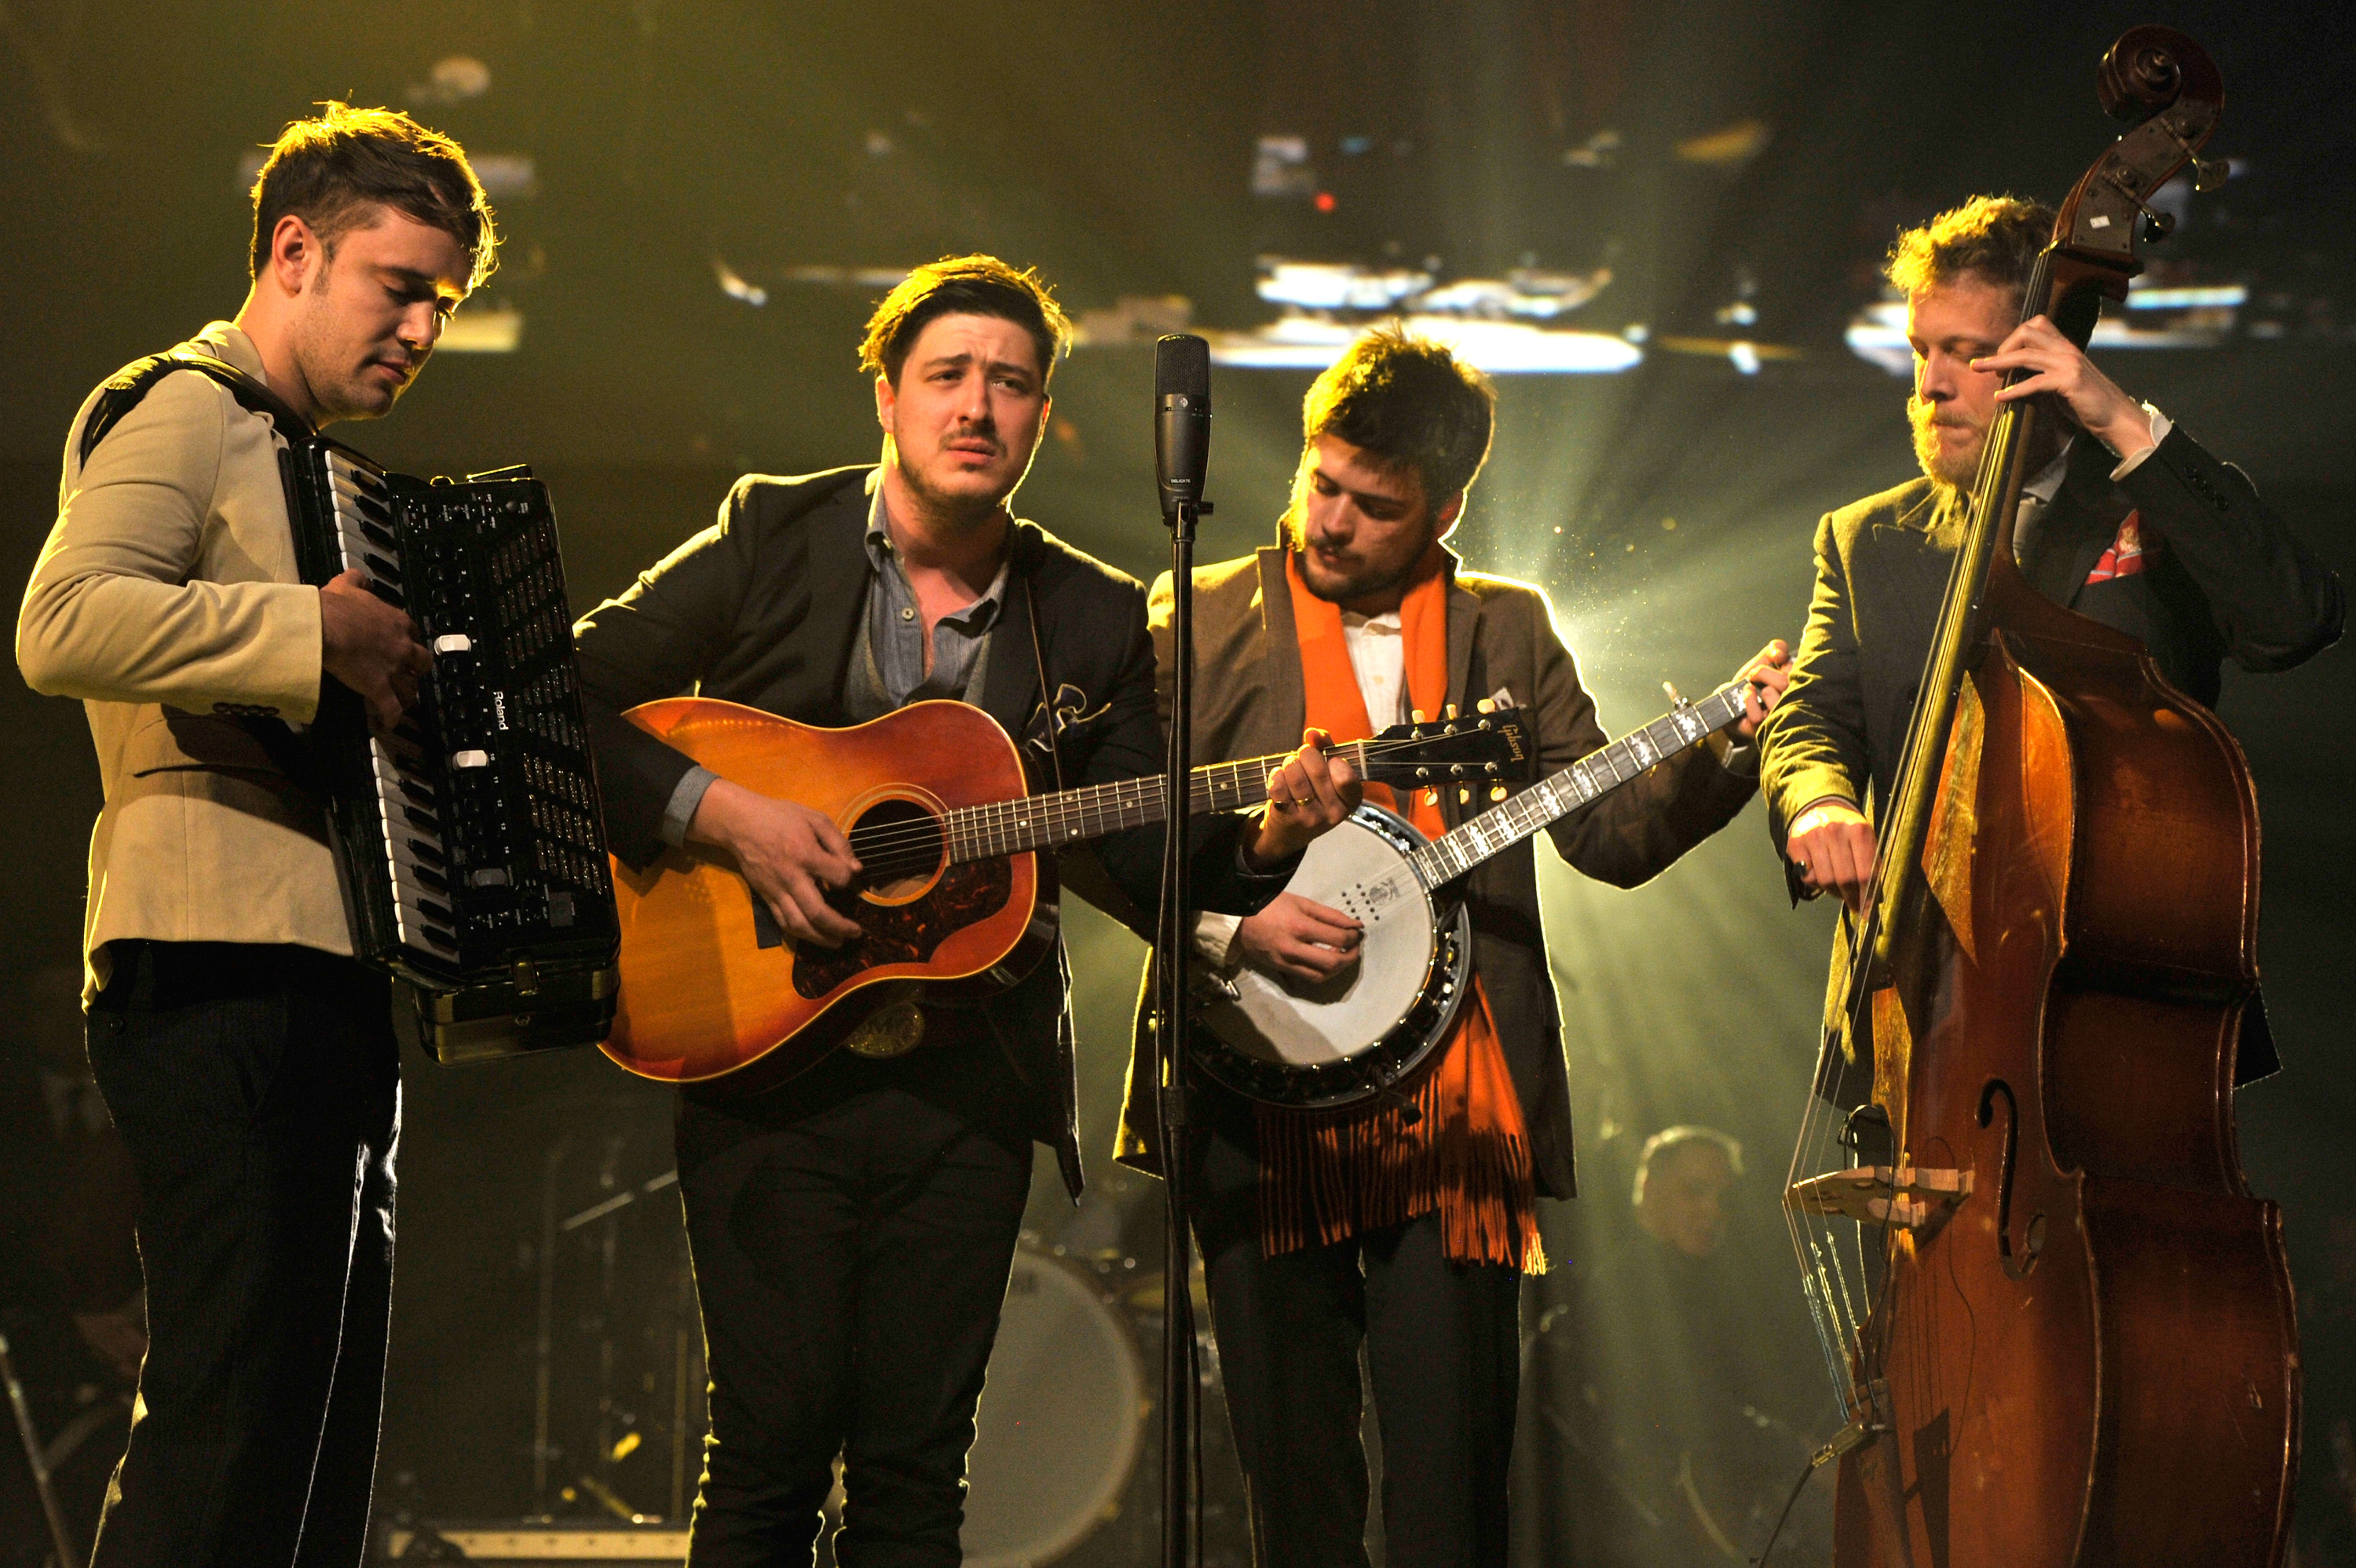 LOS ANGELES, CA - FEBRUARY 08:  (L-R) Musicians Ben Lovett, Marcus Mumford, 'Country' Winston Marshall and Ted Dwane of Mumford & Sons perform onstage at MusiCares Person Of The Year Honoring Bruce Springsteen on February 8, 2013 in Los Angeles, California.  (Photo by Larry Busacca/Getty Images for NARAS)